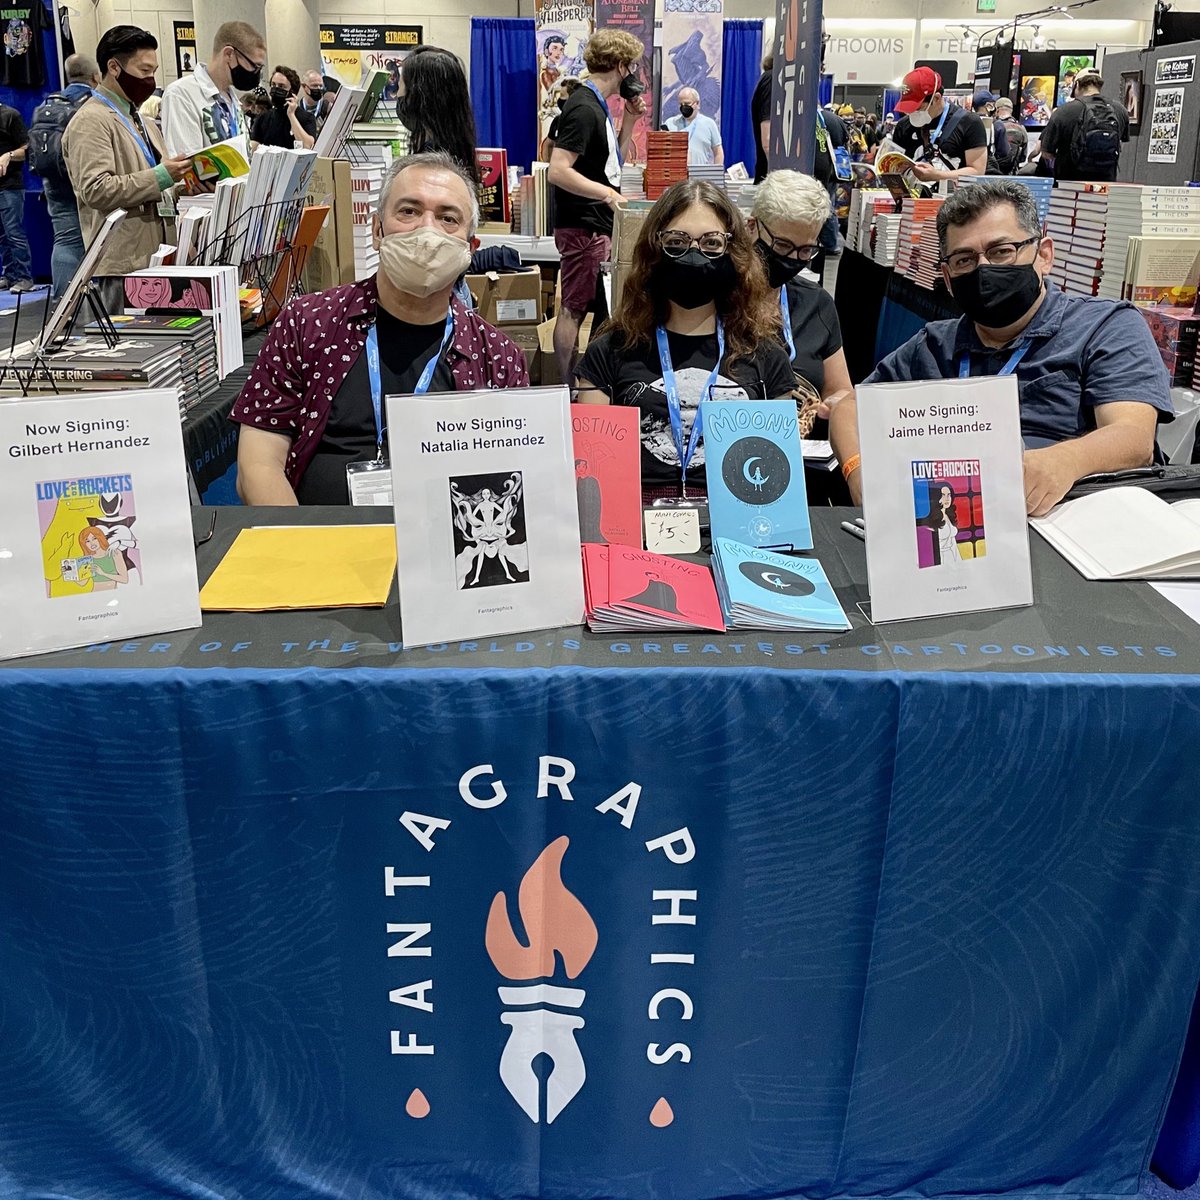 So much talent in one small space: Gilbert, Jaime, and Natalia Hernandez are signing here at the Fantagraphics booth (1721) at @Comic_Con! They’ll be signing here until 2:00, again at 5:00, and tomorrow at 3:30! Plus Gilbert and Natalia will be at the booth at noon on Saturday ❤️